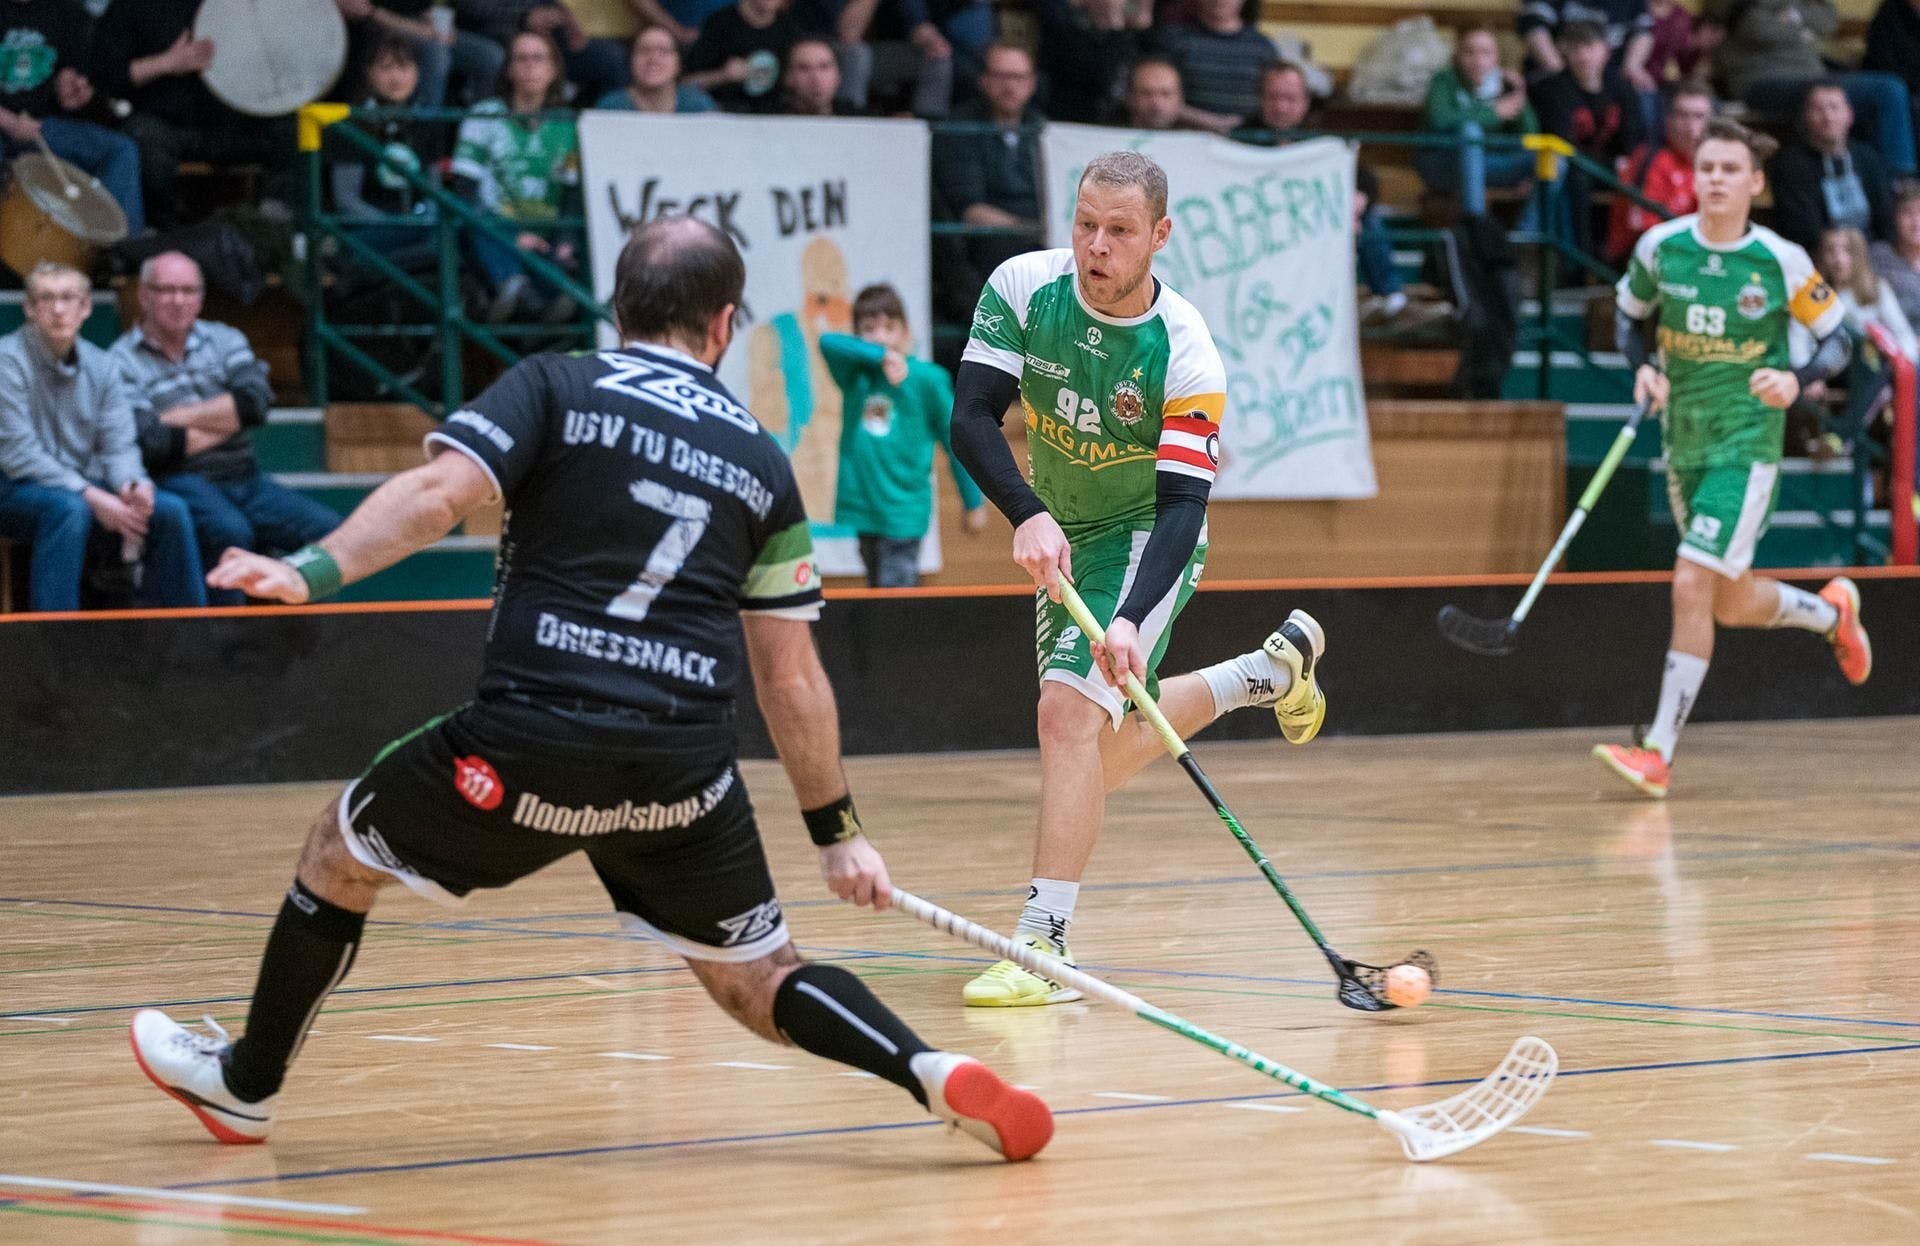 Floorball: The German League competition, Men's event, Recreational activity and indoor sport. 1920x1250 HD Background.